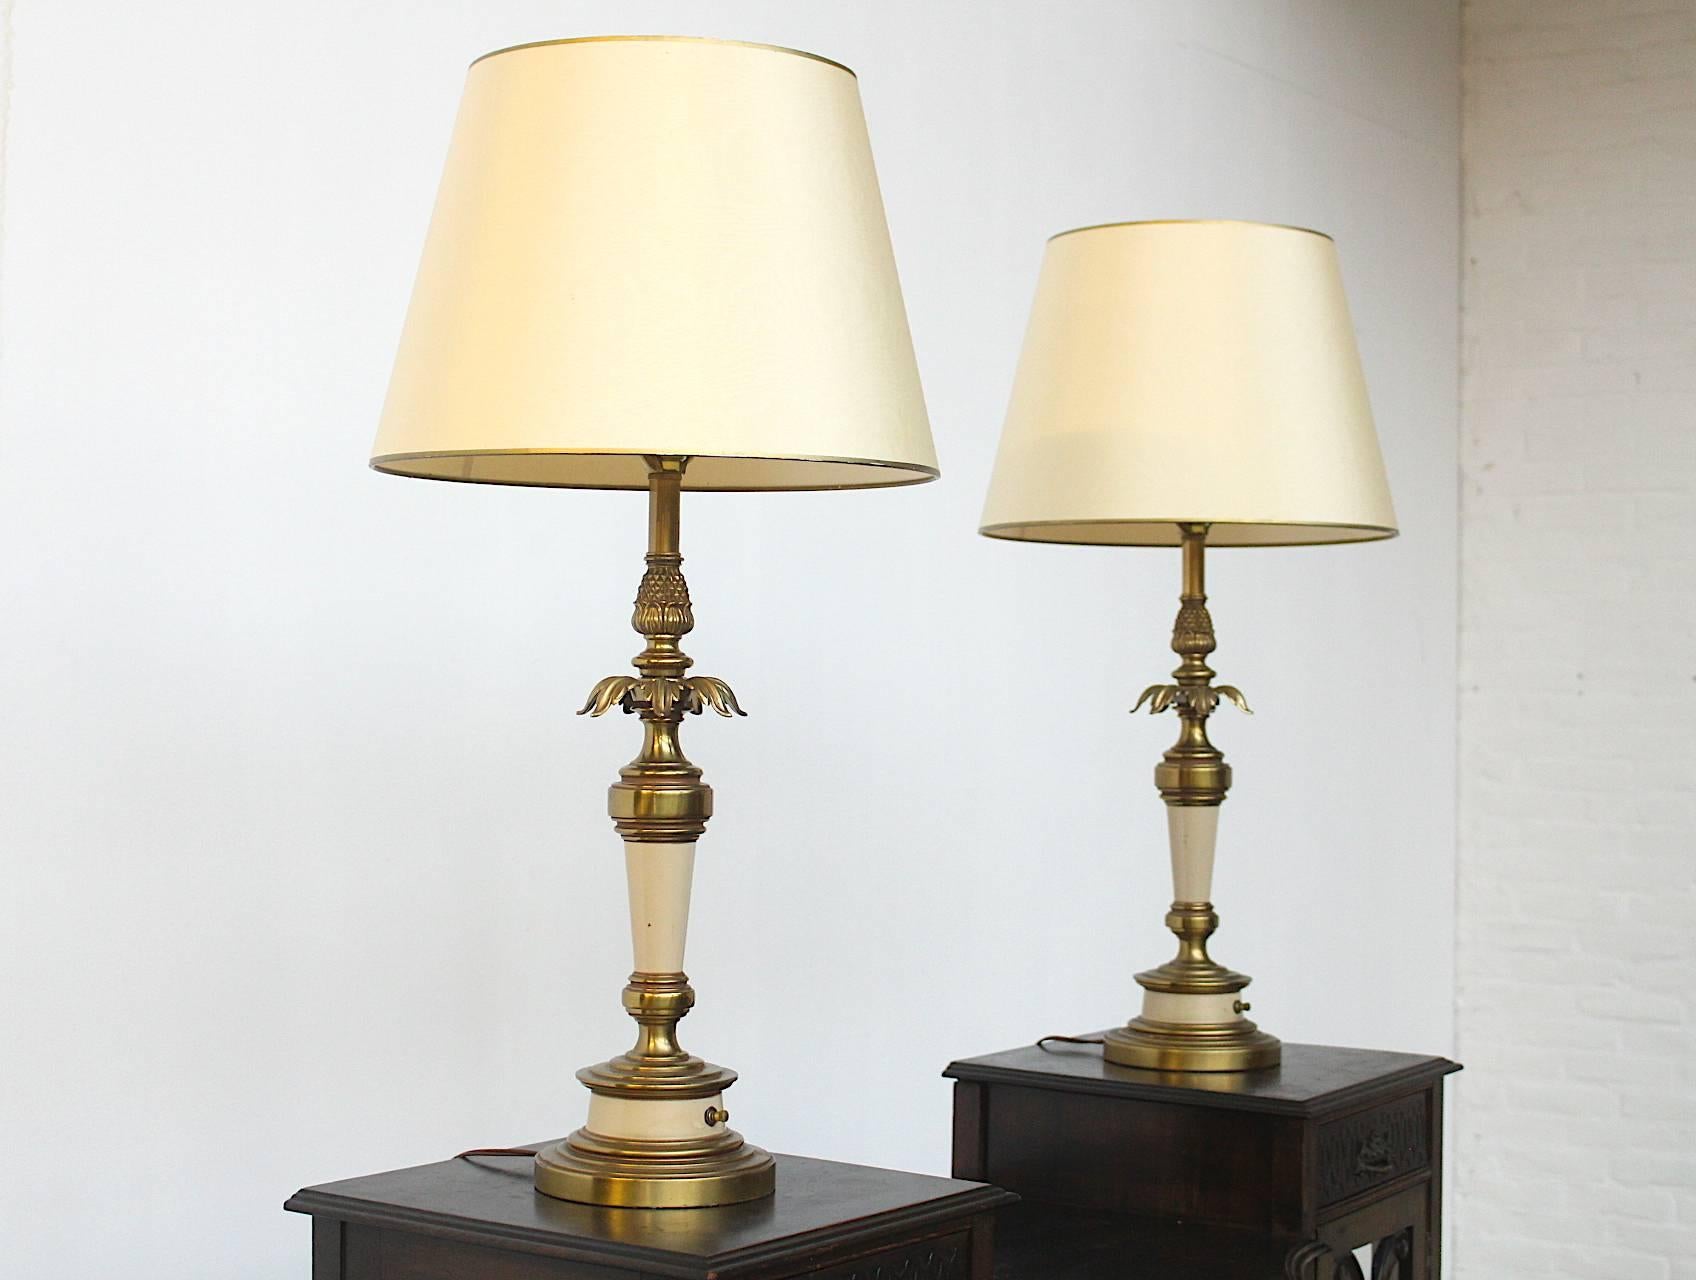 Beautiful metal and copper set of two identical Hollywood Regency style table lamps made circa 1960 by the Stiffel lighting company in Chicago, IL.
These two lamps have their original shades in excellent condition, please note that these lights are